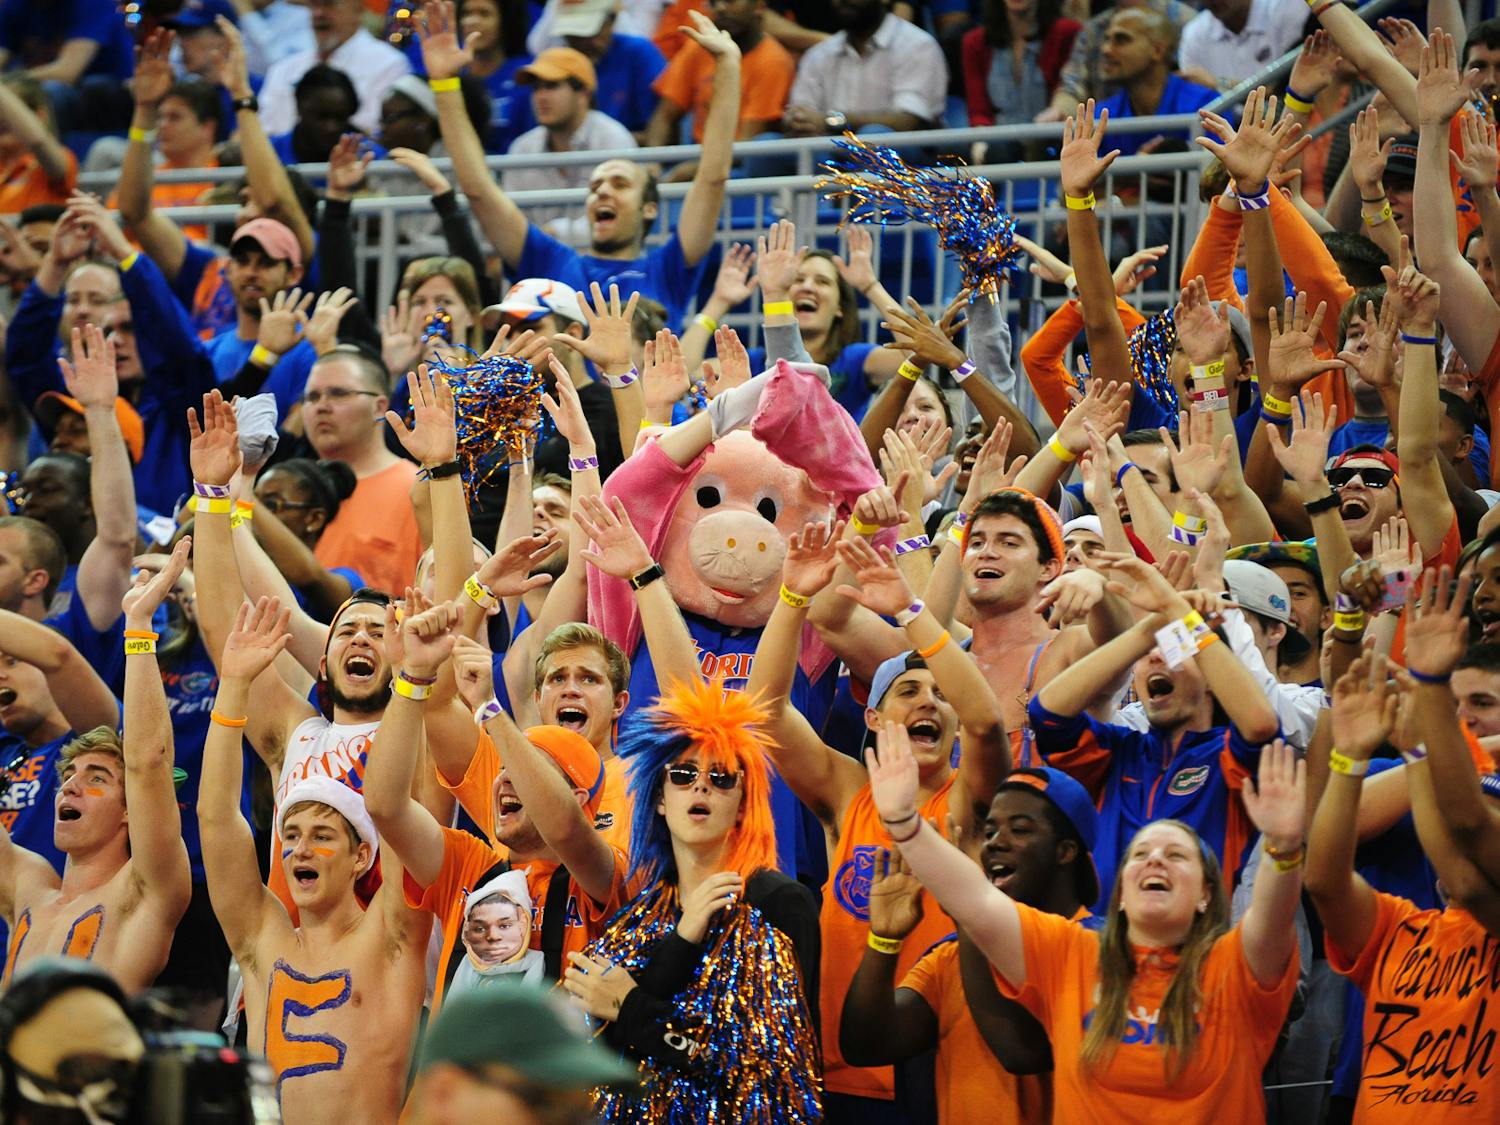 Gators fans cheer during No. 19 Florida's 67-61 win against No. 13 Kansas on Dec. 10 in the O'Connell Center.